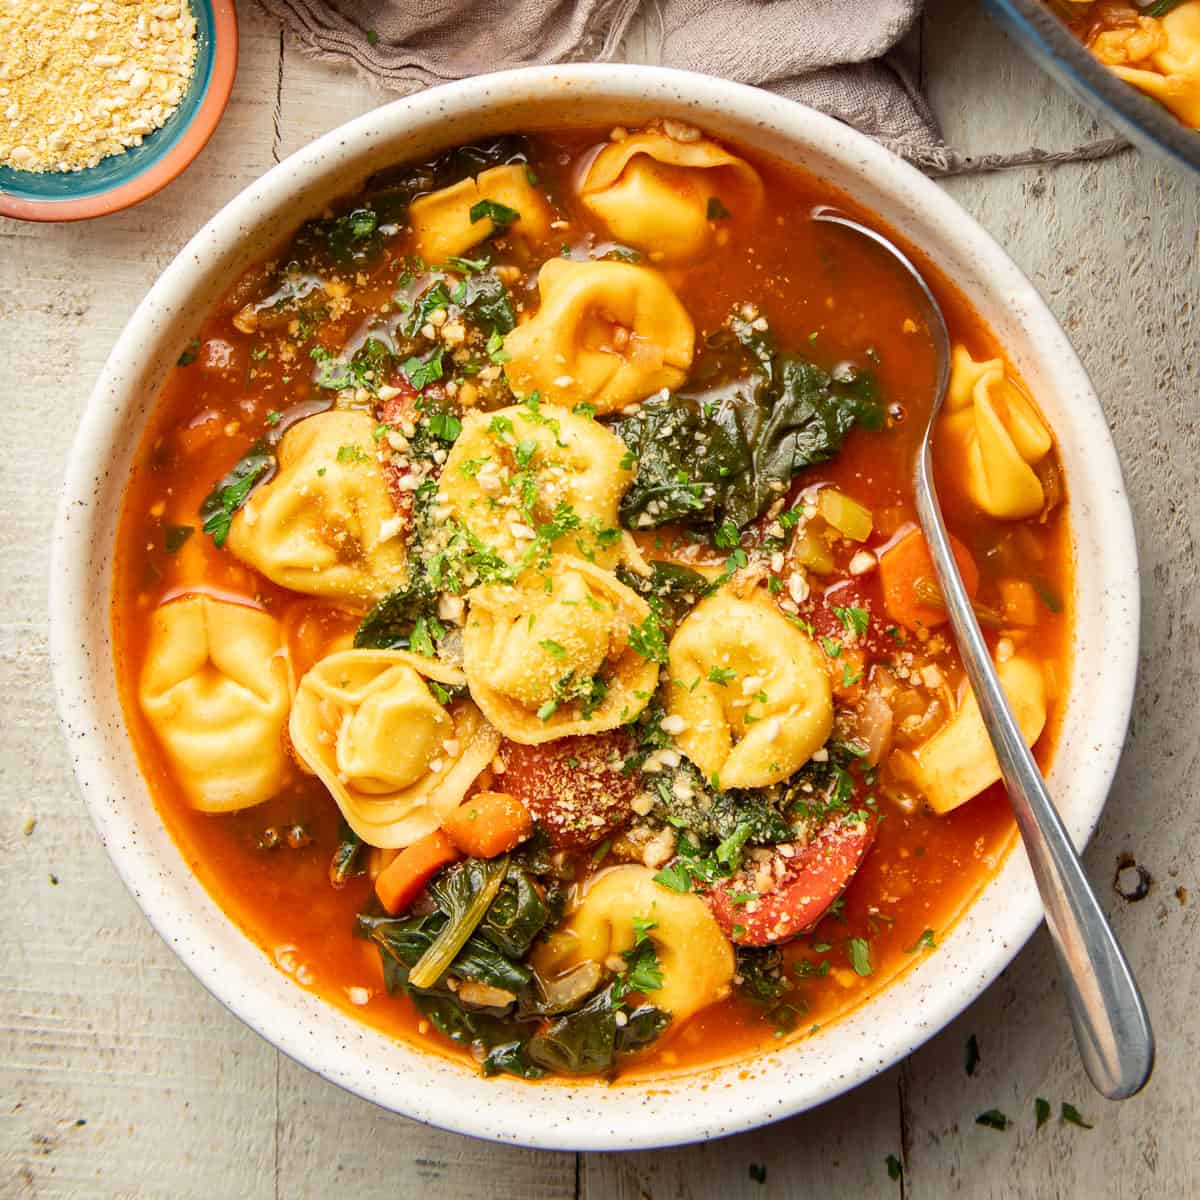 Bowl of Vegan Tortellini Soup with a spoon.